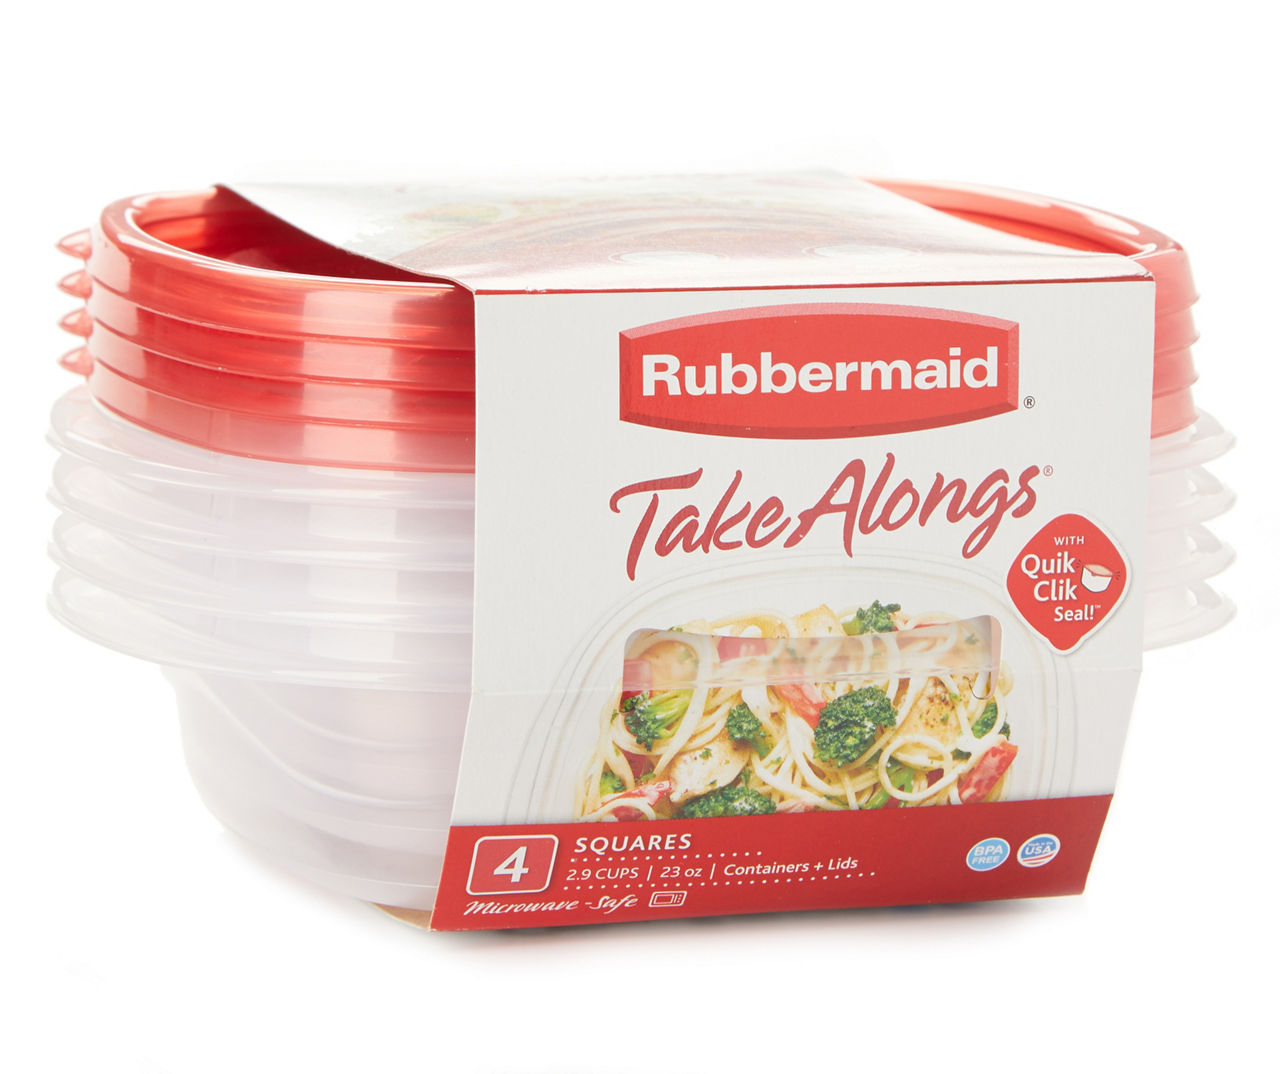 Rubbermaid TakeAlongs 2.9 Cup Deep Square 4-Container Storage Set